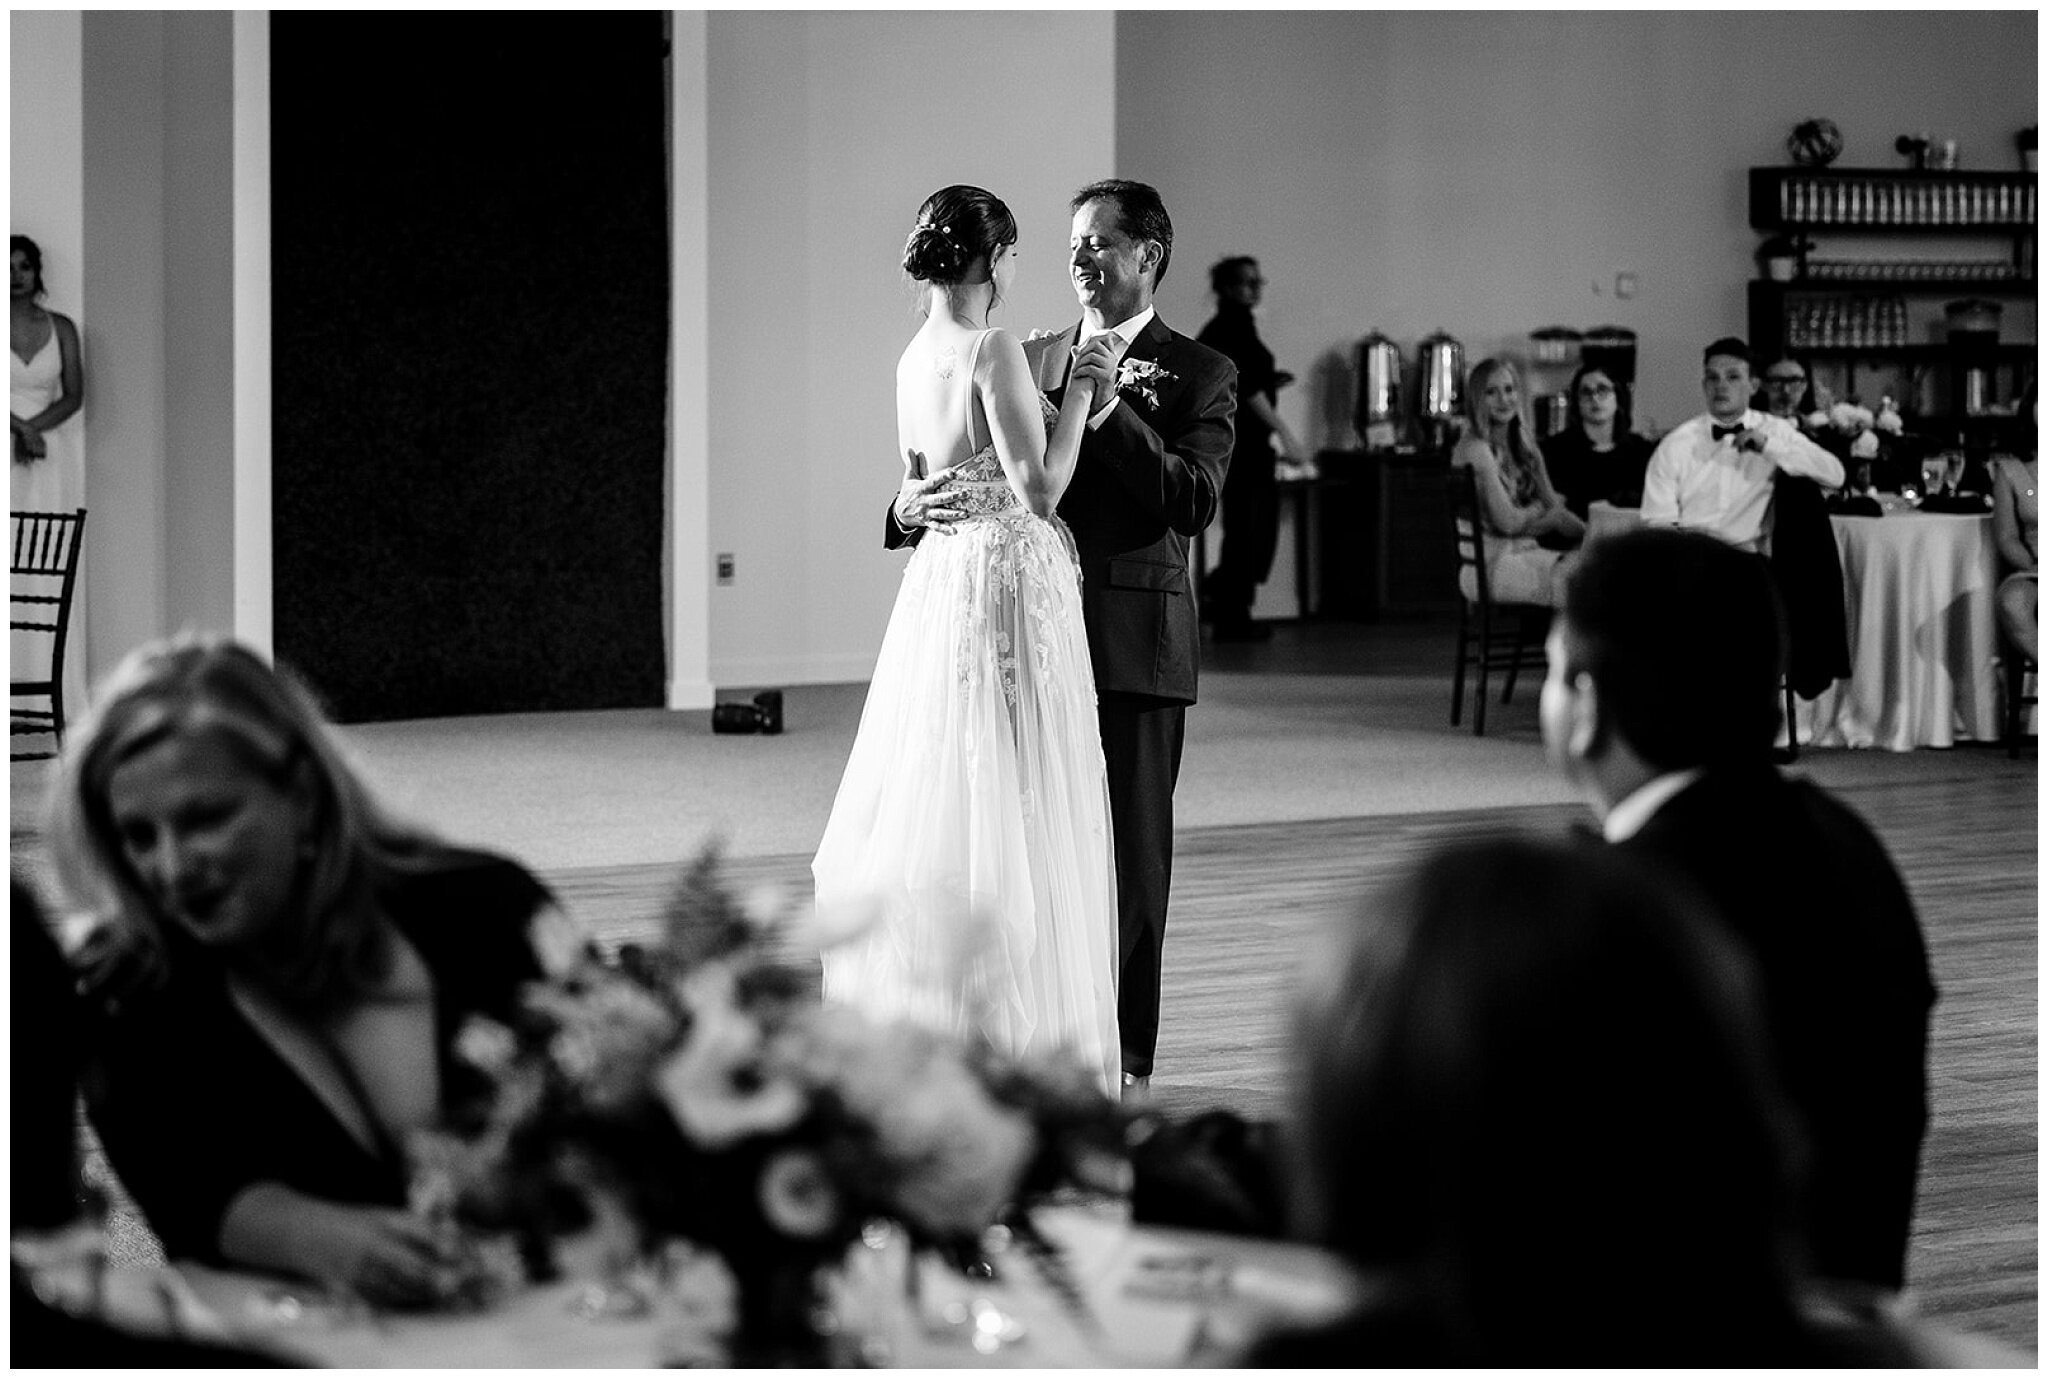  Wedding Photography by www.robbmccormick.com ©2021 